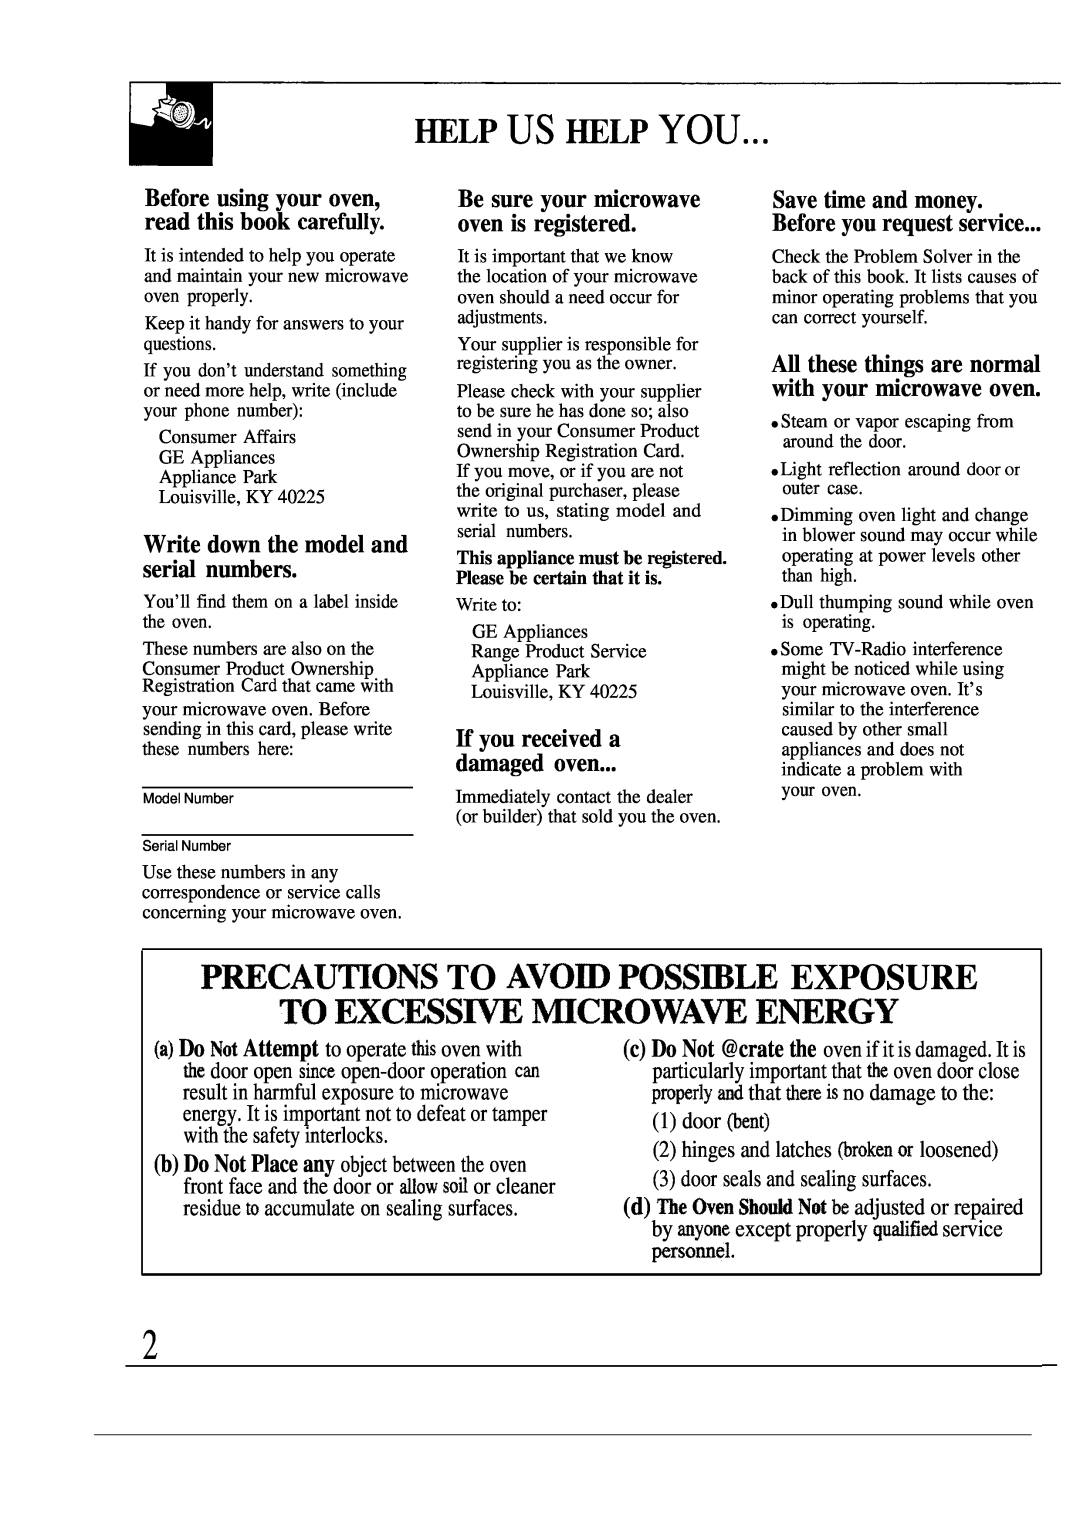 GE 49-8391 ~Lp Us ~Lp You, PmCAU~ONS TO AVO~ POSS~LE EXPOSURE TO EXCESS~ MCROWA~ E~RGY, If you received a damaged oven 